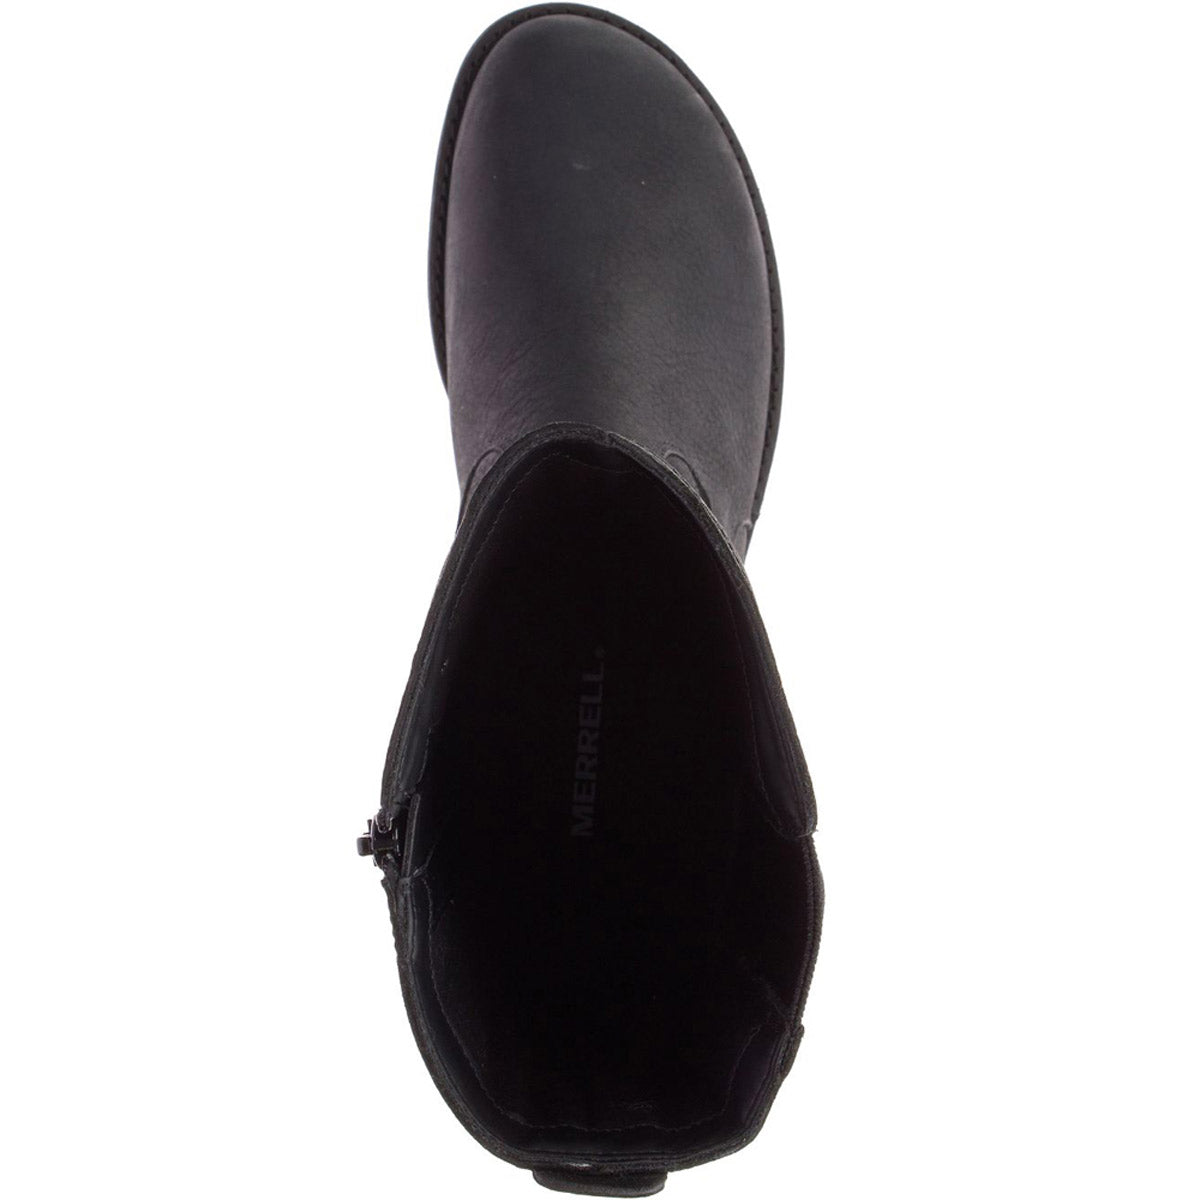 Top view of a single black Merrell Andover Peak waterproof leather boot.